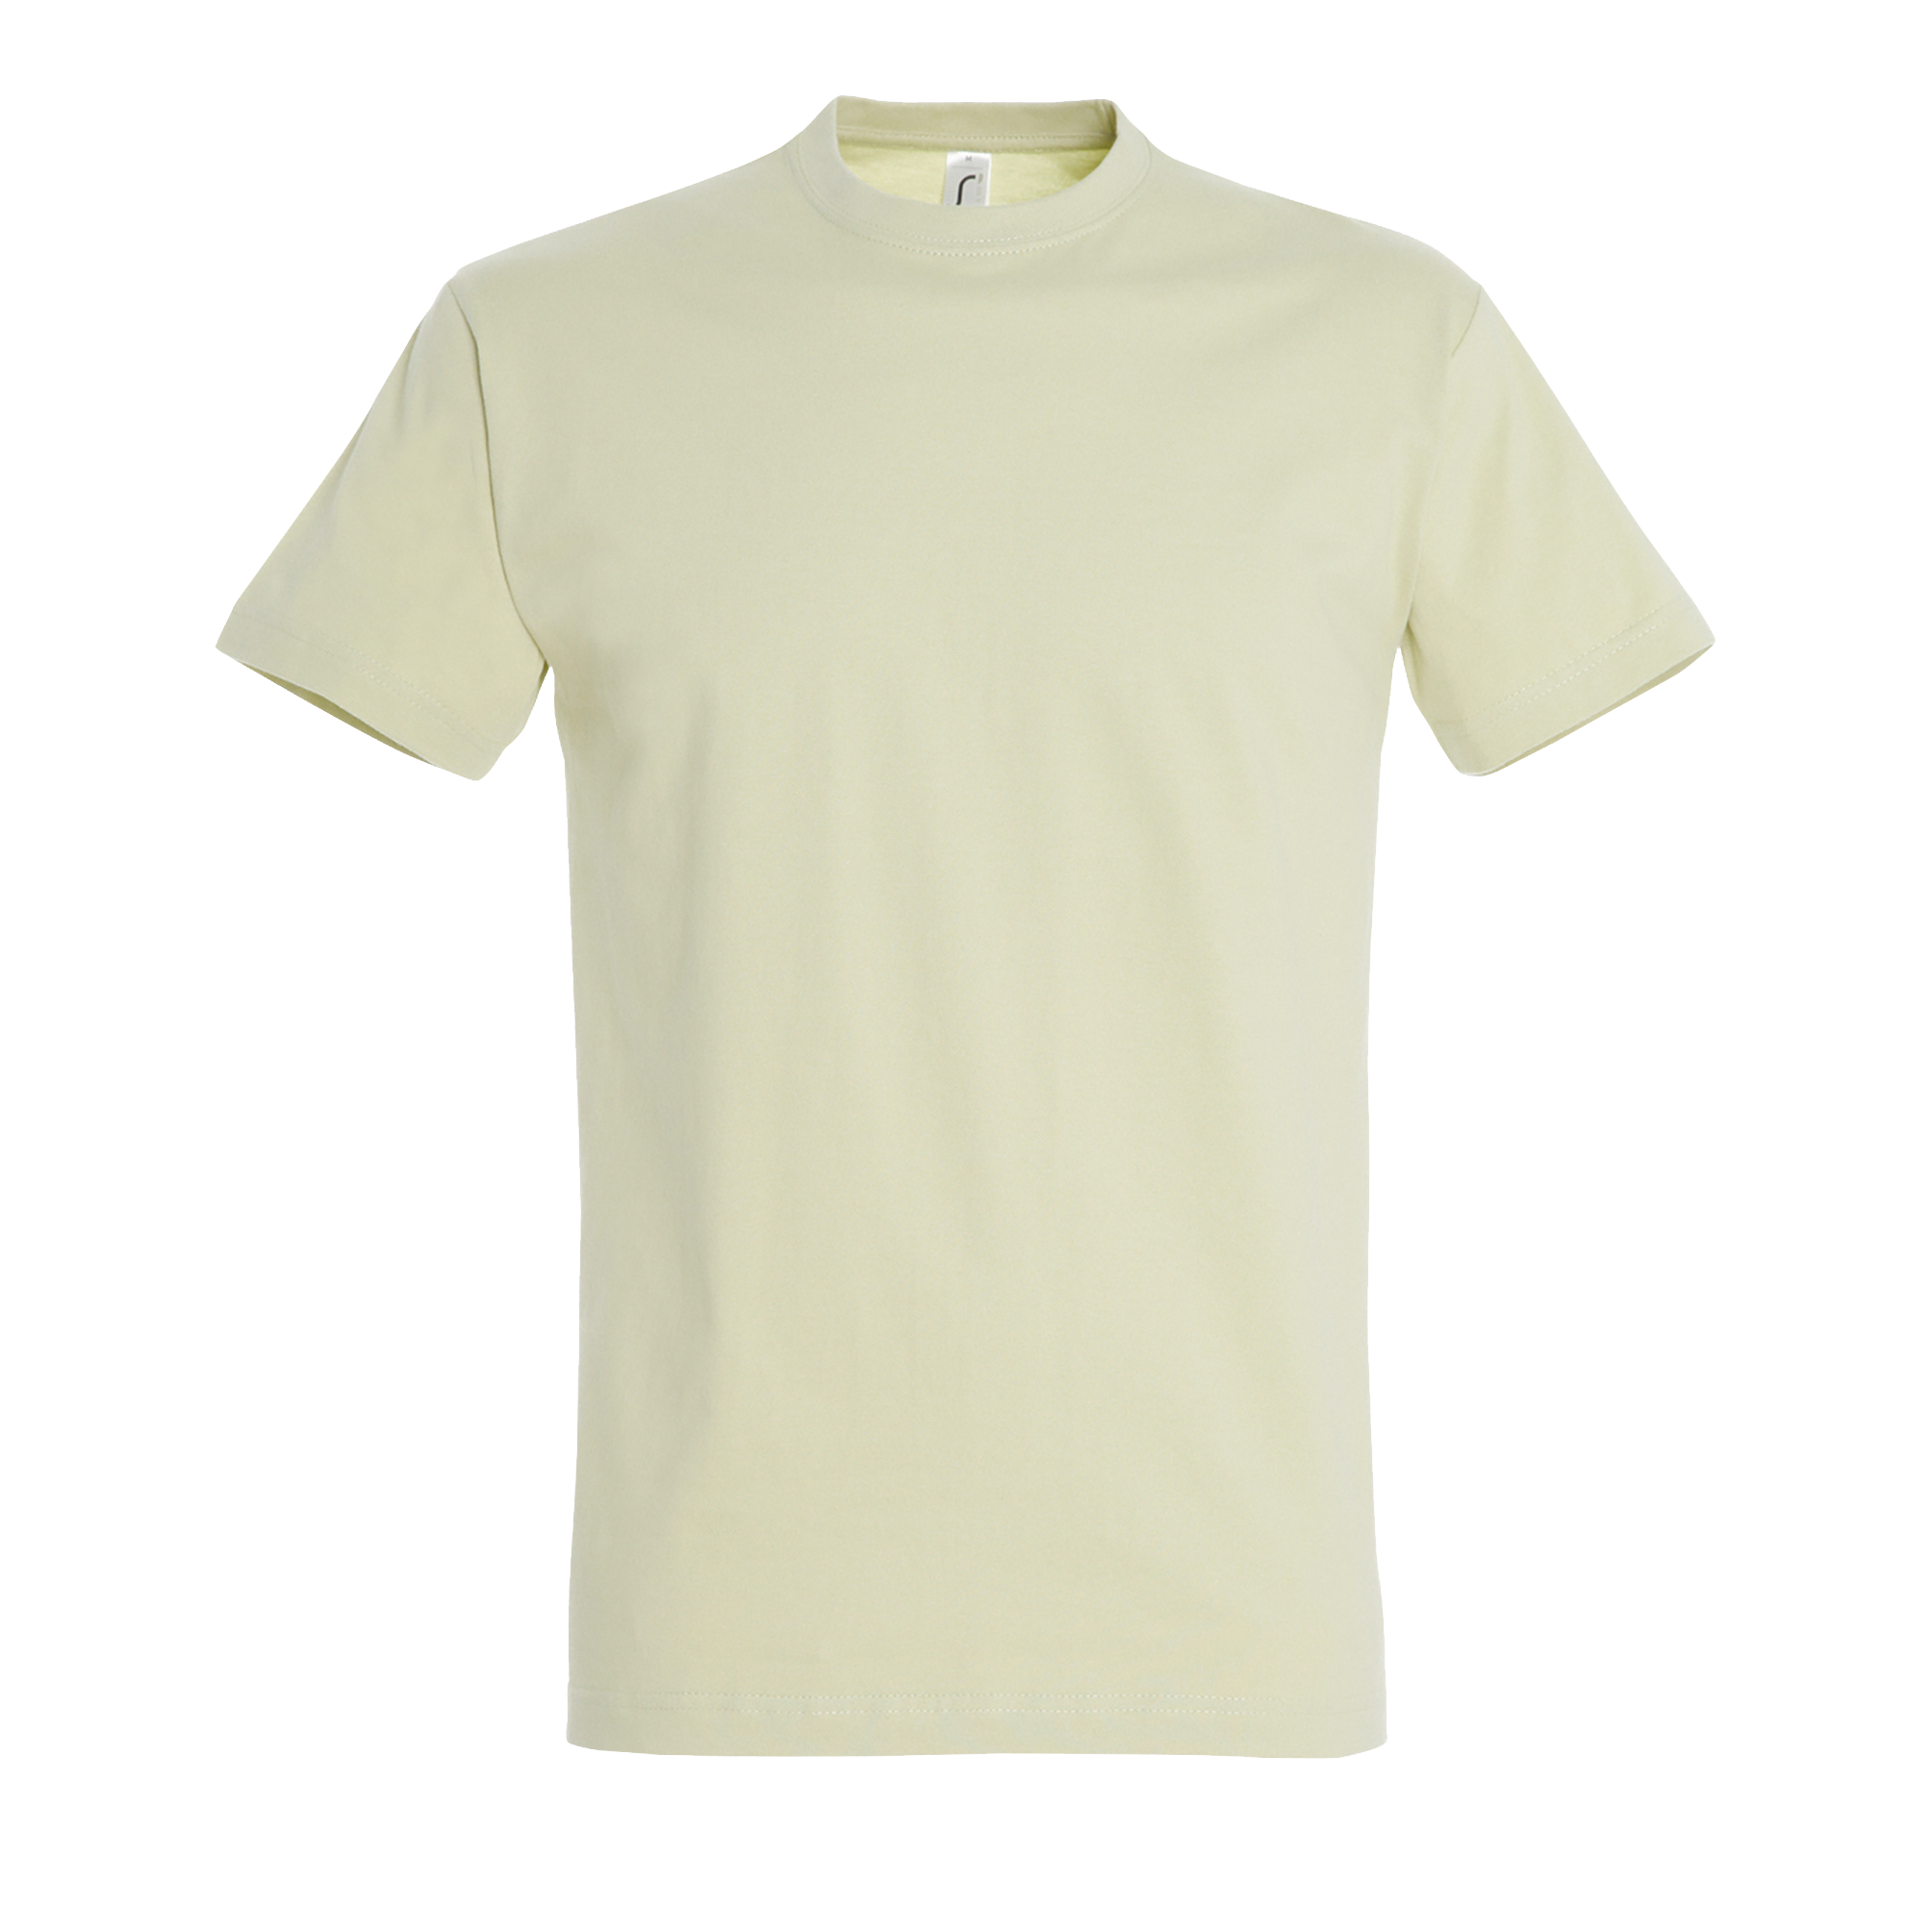 images/stories/virtuemart/sols20/2658_teeshirt_homme_col_rond_imperial_apple_green_face